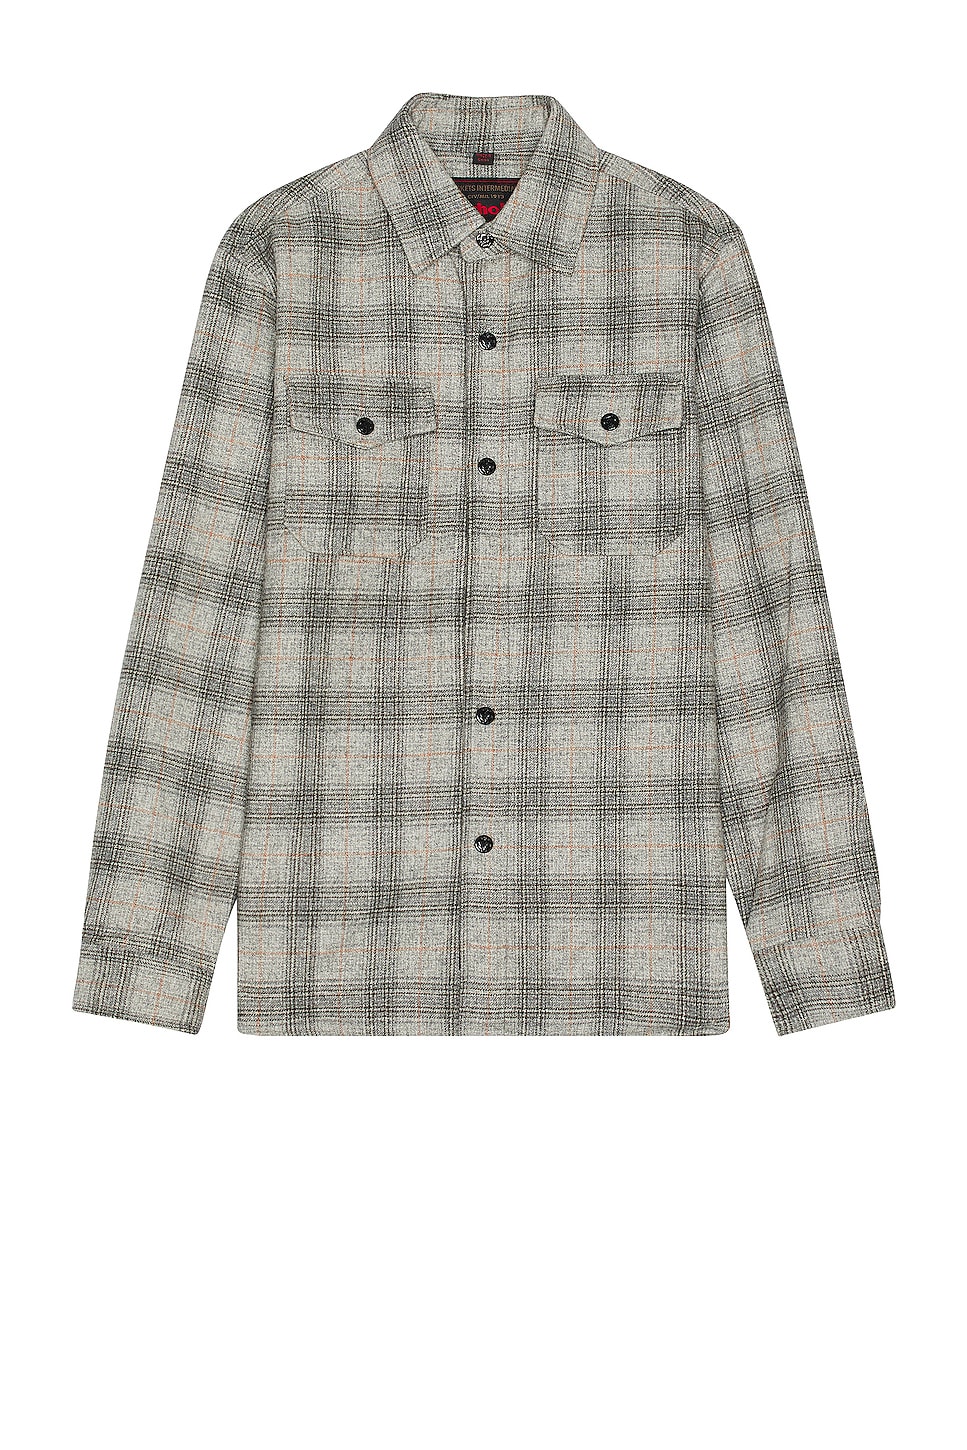 Image 1 of Schott Nyc Plaid Cpo Shirt in Heather Grey